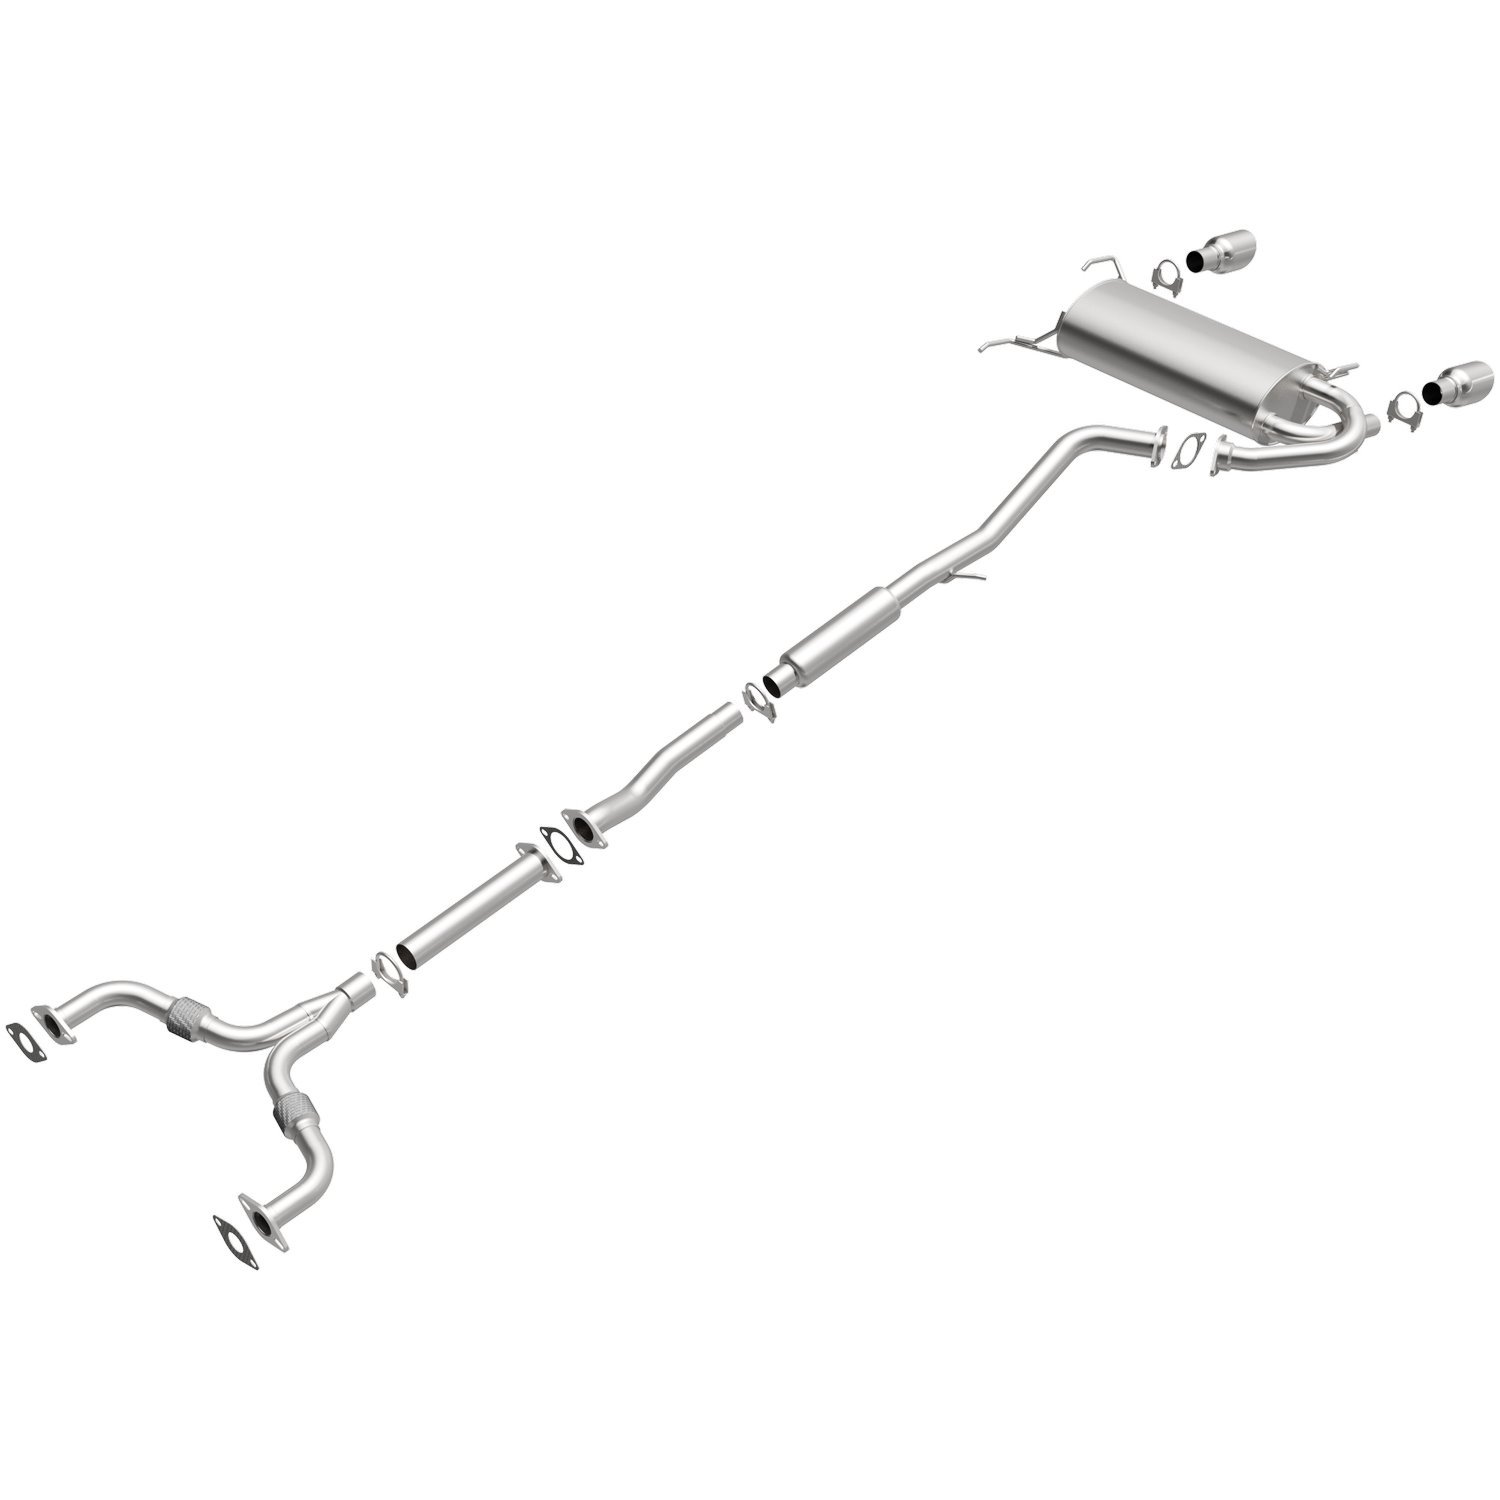 Direct-Fit Exhaust Kit, 2003-2007 Infiniti G35